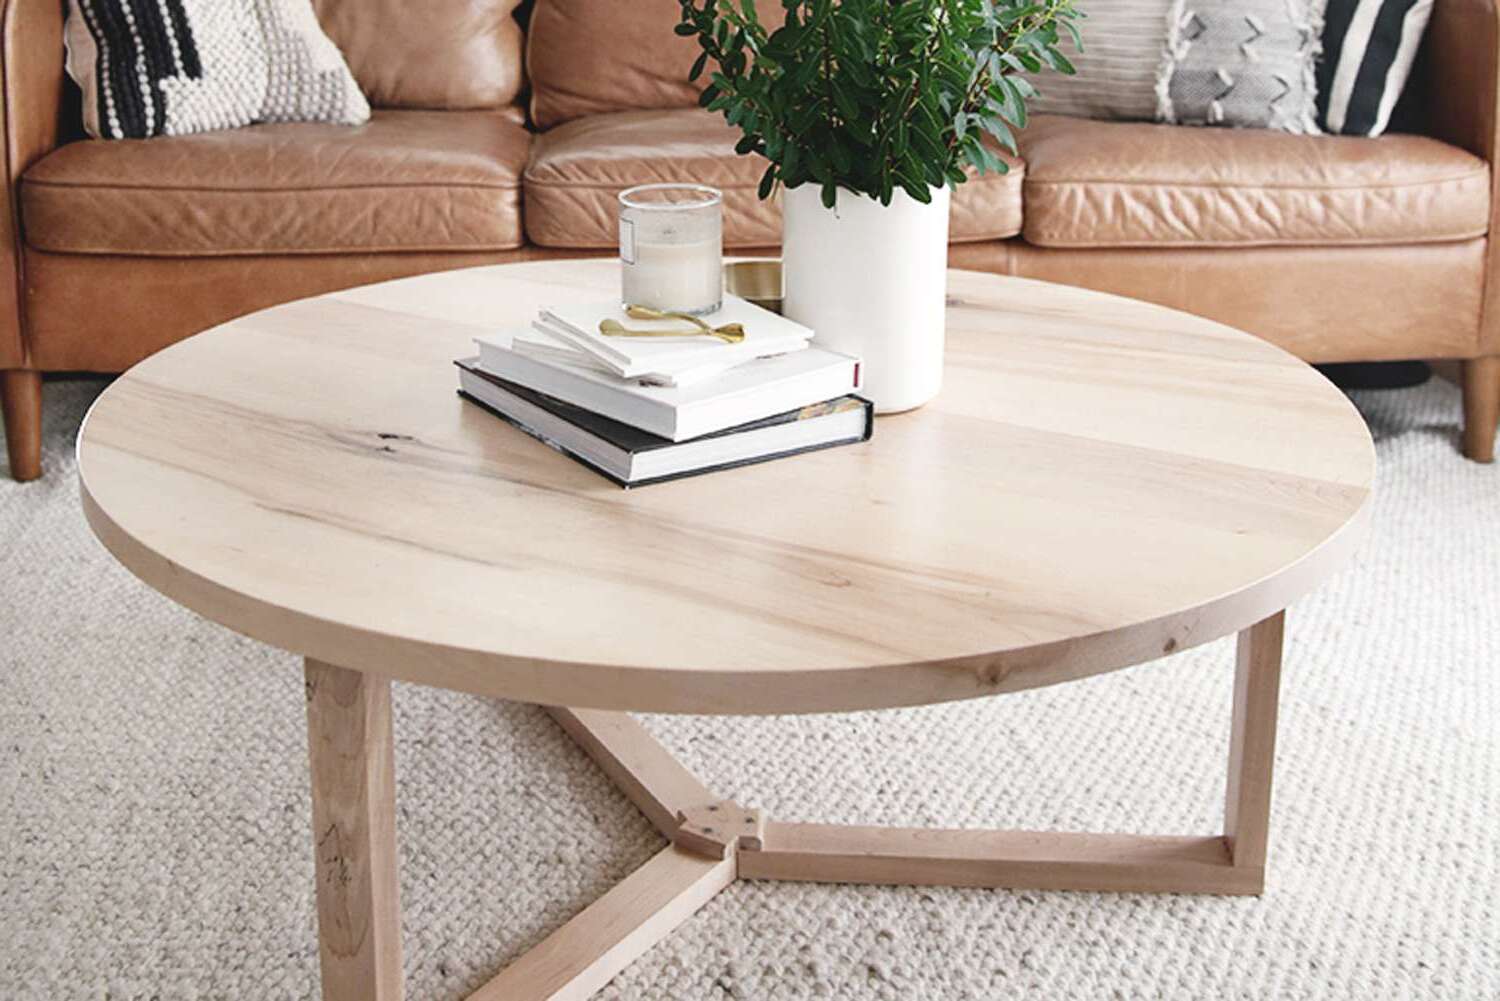 DIY Coffee Table: Create Your Own Stylish and Functional Piece ...